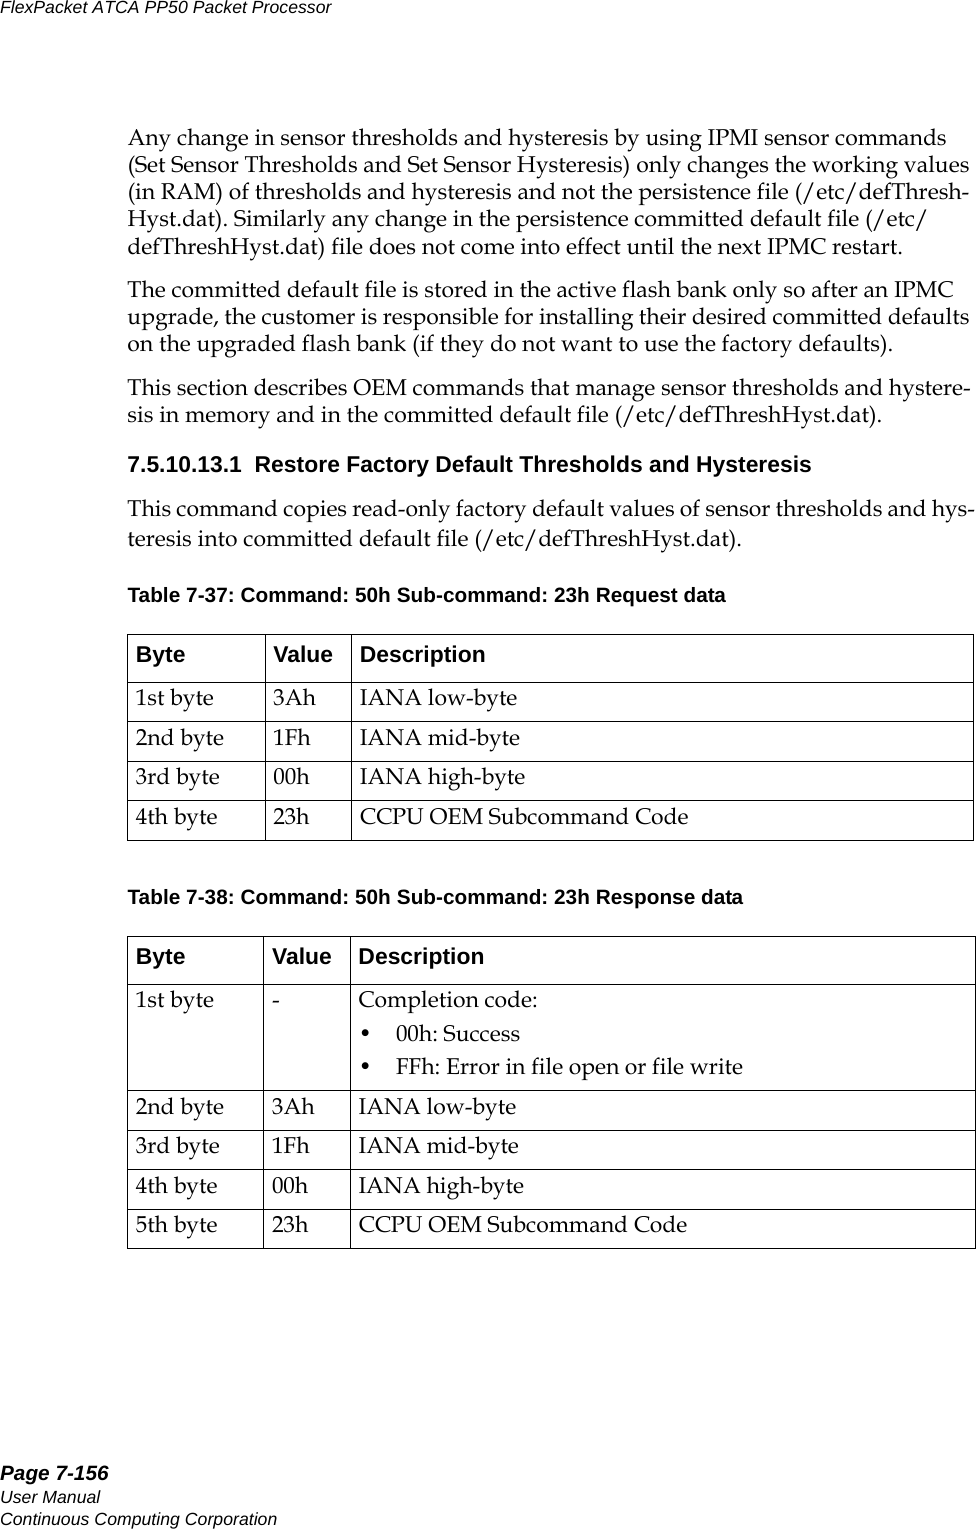 Page 7-156User ManualContinuous Computing CorporationFlexPacket ATCA PP50 Packet Processor     PreliminaryAny change in sensor thresholds and hysteresis by using IPMI sensor commands (Set Sensor Thresholds and Set Sensor Hysteresis) only changes the working values (in RAM) of thresholds and hysteresis and not the persistence file (/etc/defThresh-Hyst.dat). Similarly any change in the persistence committed default file (/etc/defThreshHyst.dat) file does not come into effect until the next IPMC restart. The committed default file is stored in the active flash bank only so after an IPMC upgrade, the customer is responsible for installing their desired committed defaults on the upgraded flash bank (if they do not want to use the factory defaults). This section describes OEM commands that manage sensor thresholds and hystere-sis in memory and in the committed default file (/etc/defThreshHyst.dat).7.5.10.13.1  Restore Factory Default Thresholds and HysteresisThis command copies read-only factory default values of sensor thresholds and hys-teresis into committed default file (/etc/defThreshHyst.dat).Table 7-37: Command: 50h Sub-command: 23h Request data　Byte Value Description1st byte 3Ah  IANA low-byte 2nd byte 1Fh  IANA mid-byte 3rd byte 00h  IANA high-byte 4th byte 23h  CCPU OEM Subcommand Code Table 7-38: Command: 50h Sub-command: 23h Response dataByte Value Description1st byte -  Completion code:•00h: Success• FFh: Error in file open or file write2nd byte 3Ah  IANA low-byte 3rd byte 1Fh  IANA mid-byte 4th byte 00h  IANA high-byte 5th byte 23h  CCPU OEM Subcommand Code 